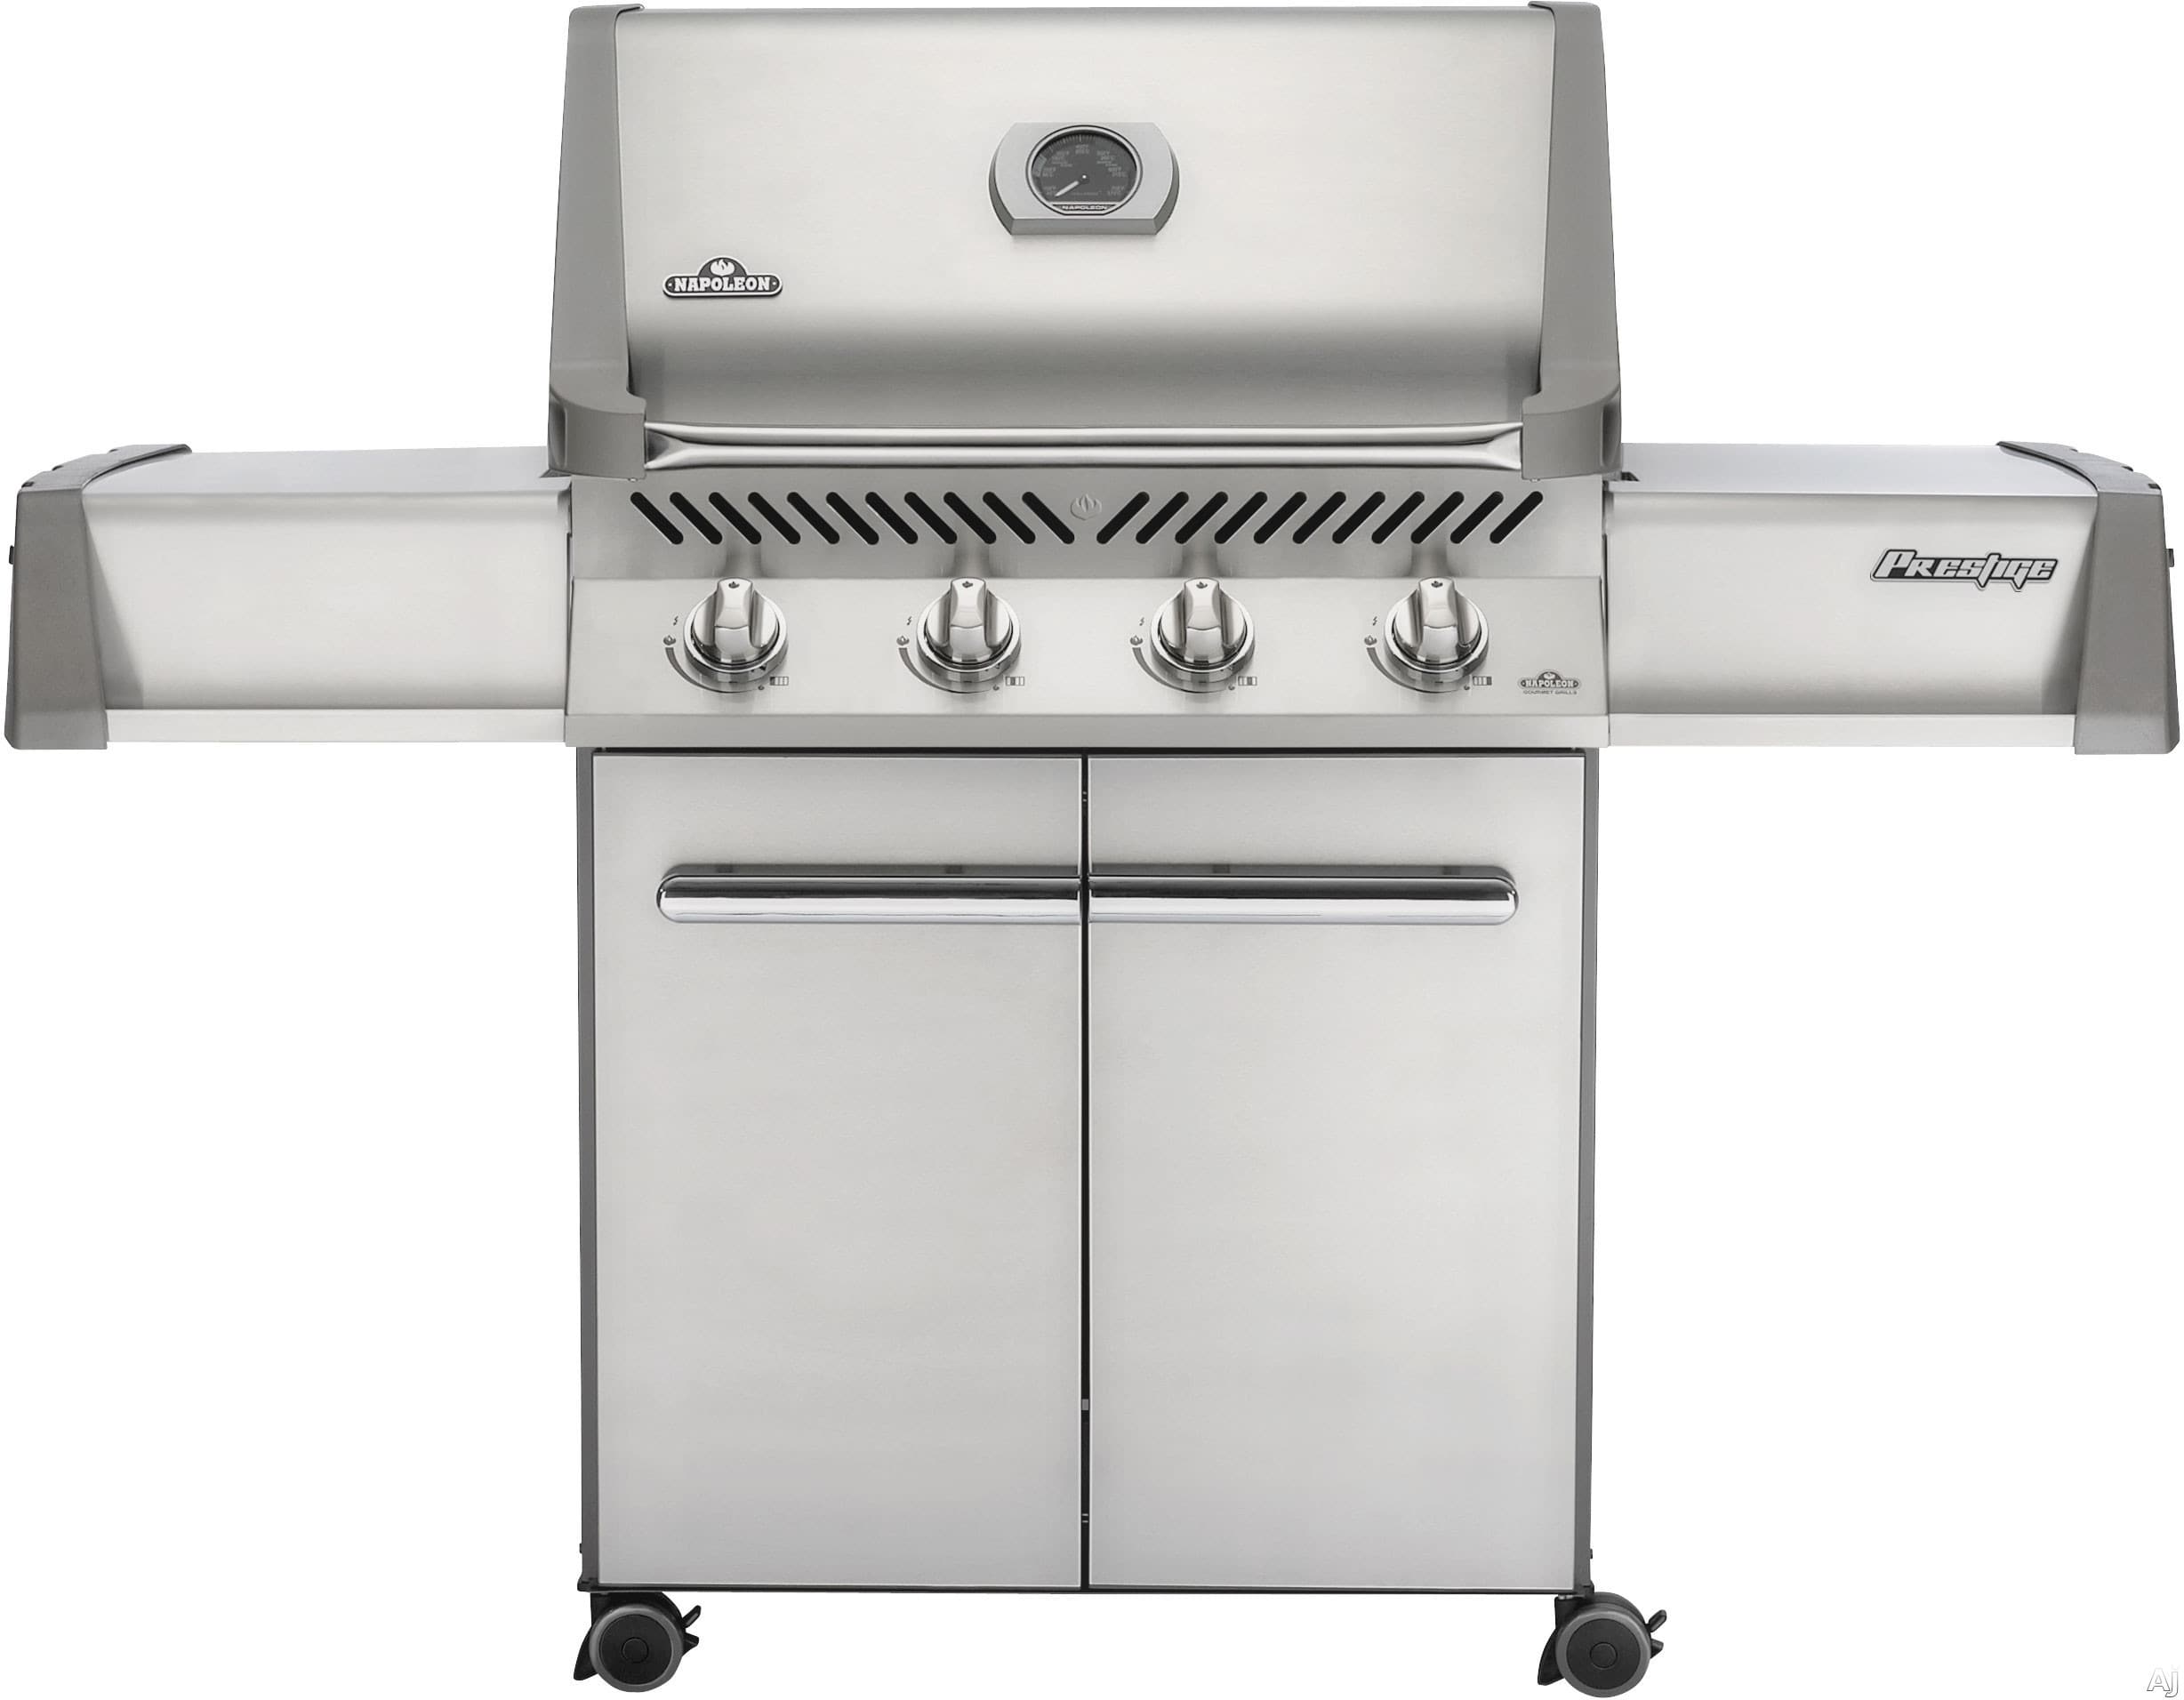 napoleon-p500pss2-64-inch-freestanding-gas-grill-with-jetfire-ignition